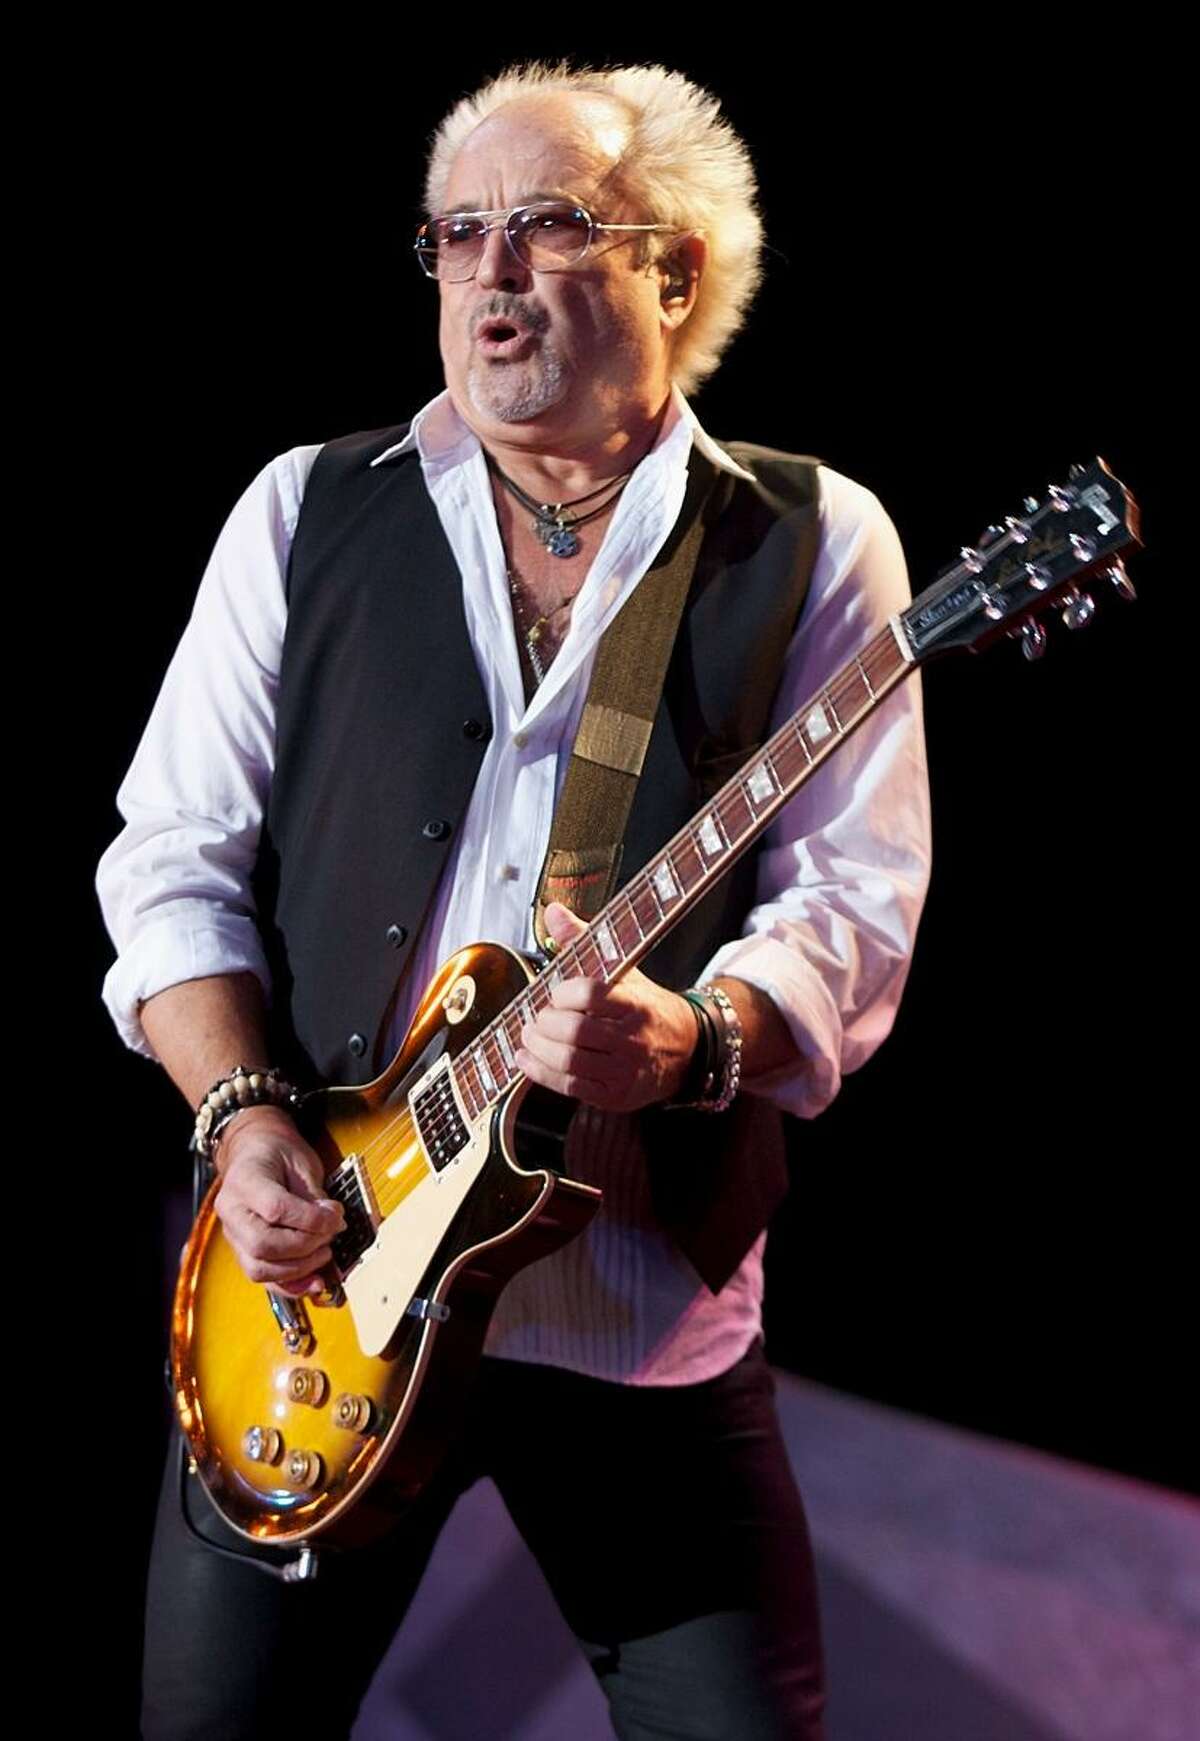 Foreigner guitarist and founding member Mick Jones is shown performing on stage during a "live" concert appearance.